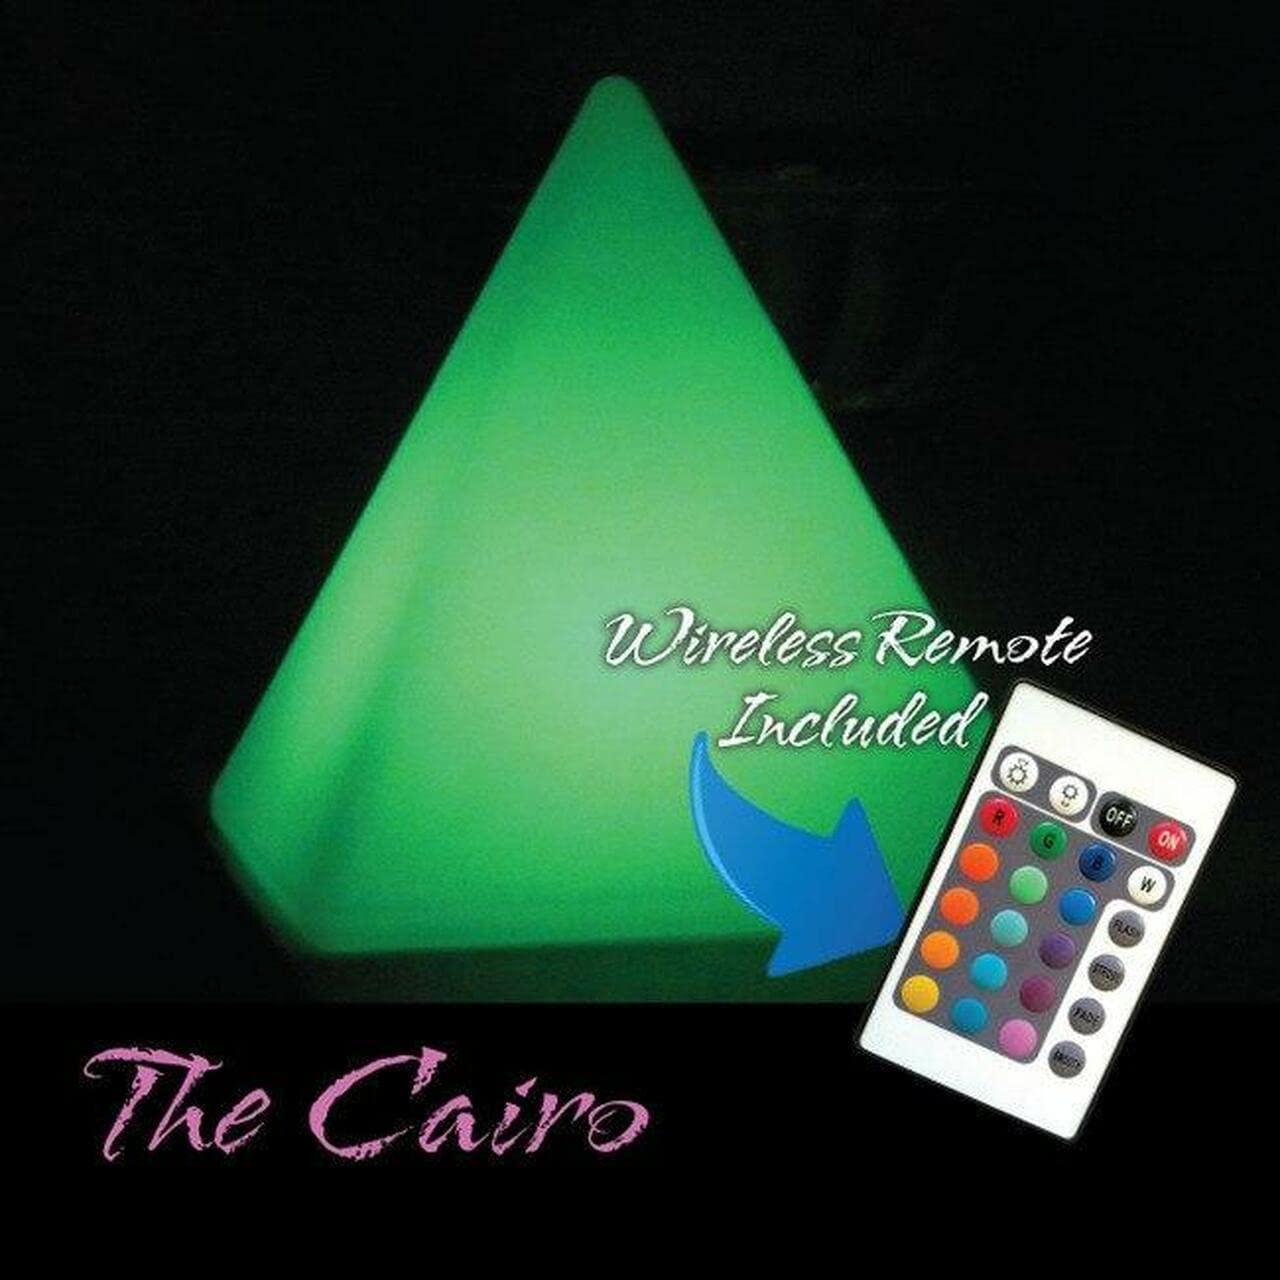 CAIRO- LED Illuminated Pyramid with 16 color options and 4 color changing modes on the remote, It floats Portable, waterproof, and requires no batteries, Charge lasts approximately 8 hours